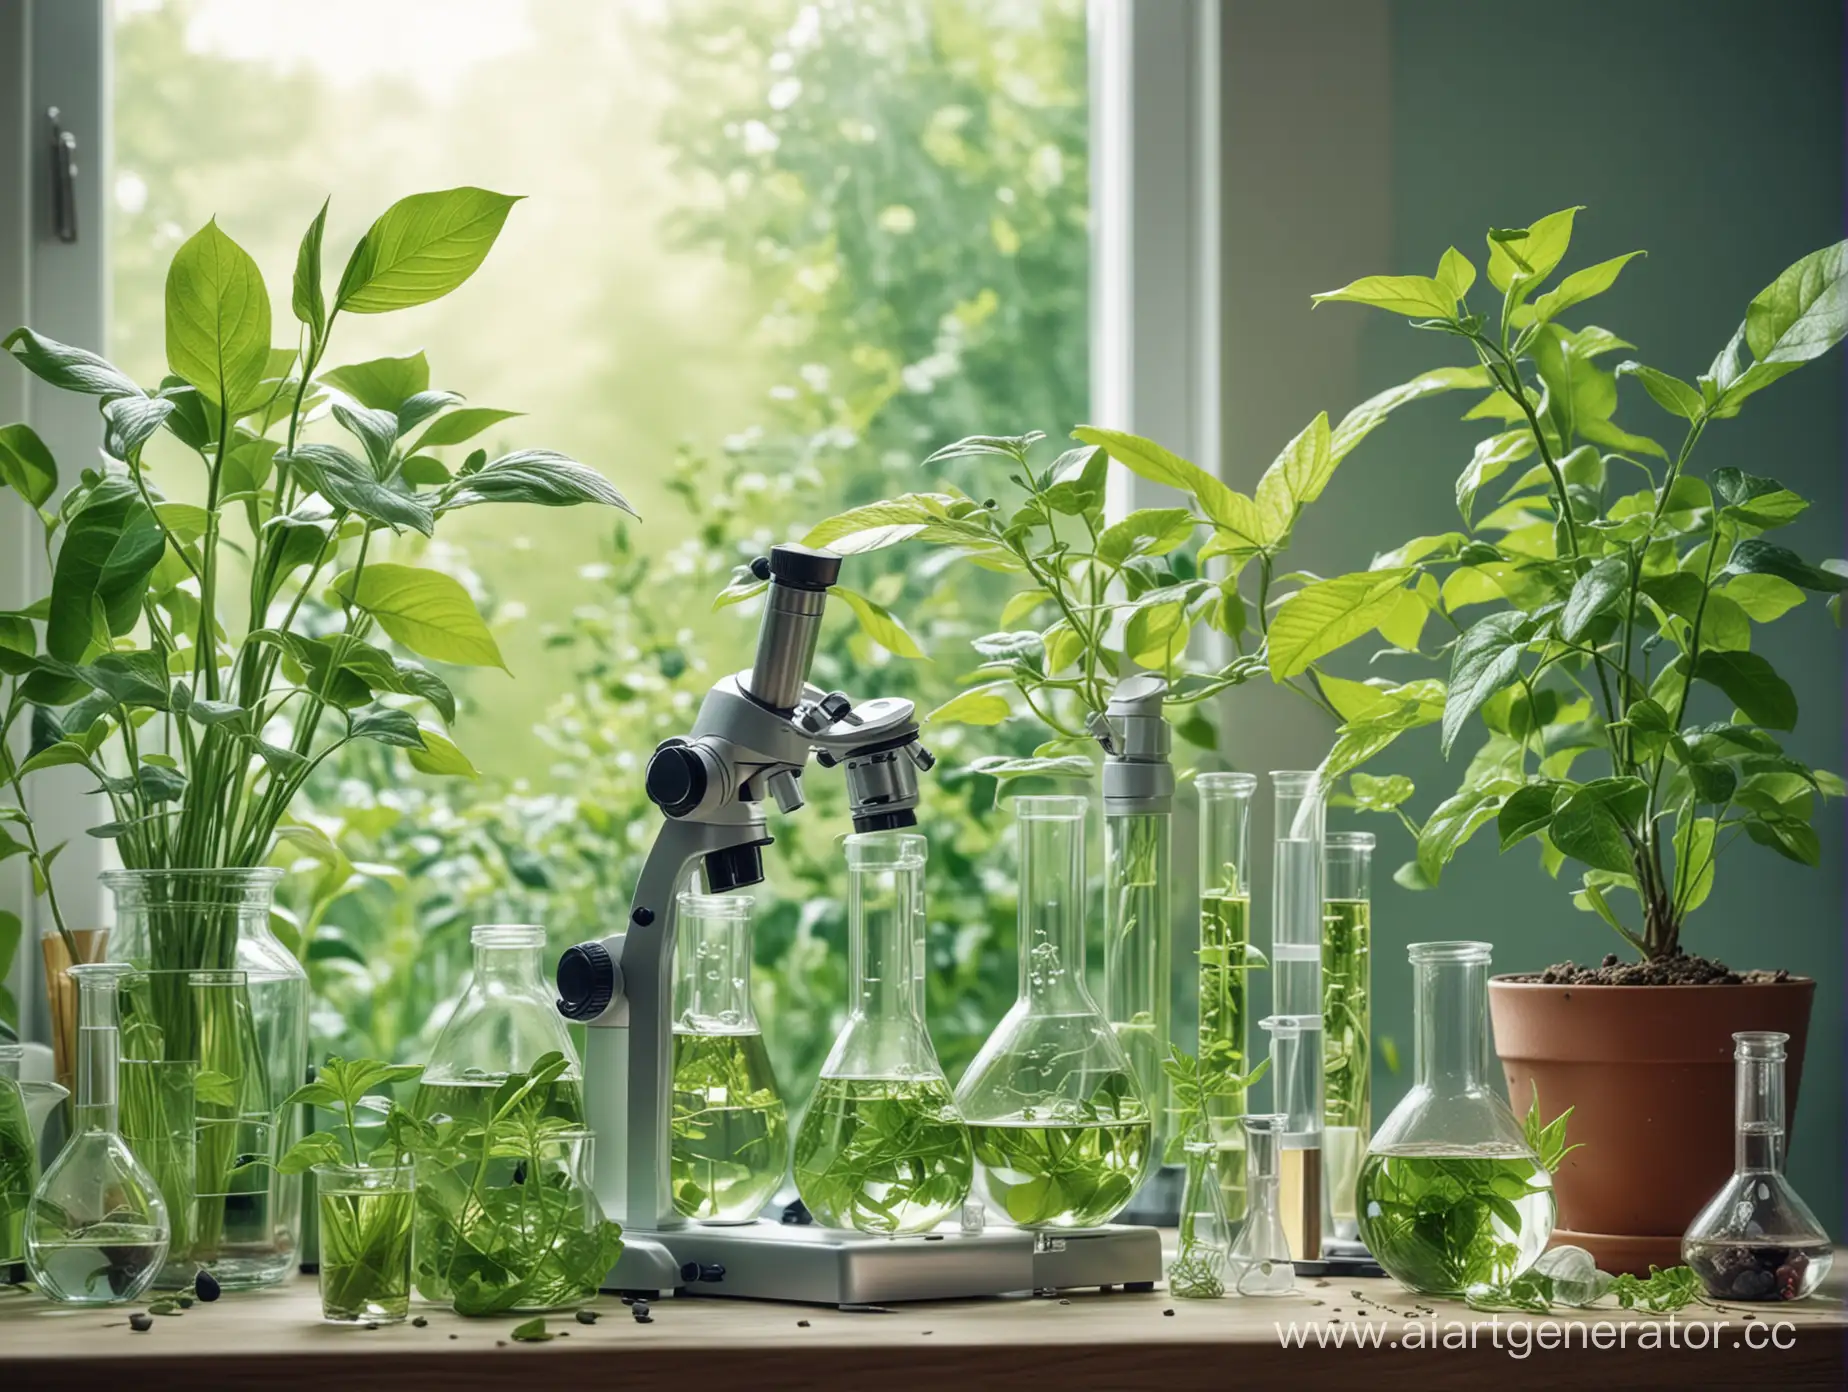 Vibrant-Botanical-Microcosm-Plant-Cells-and-Scientific-Instruments